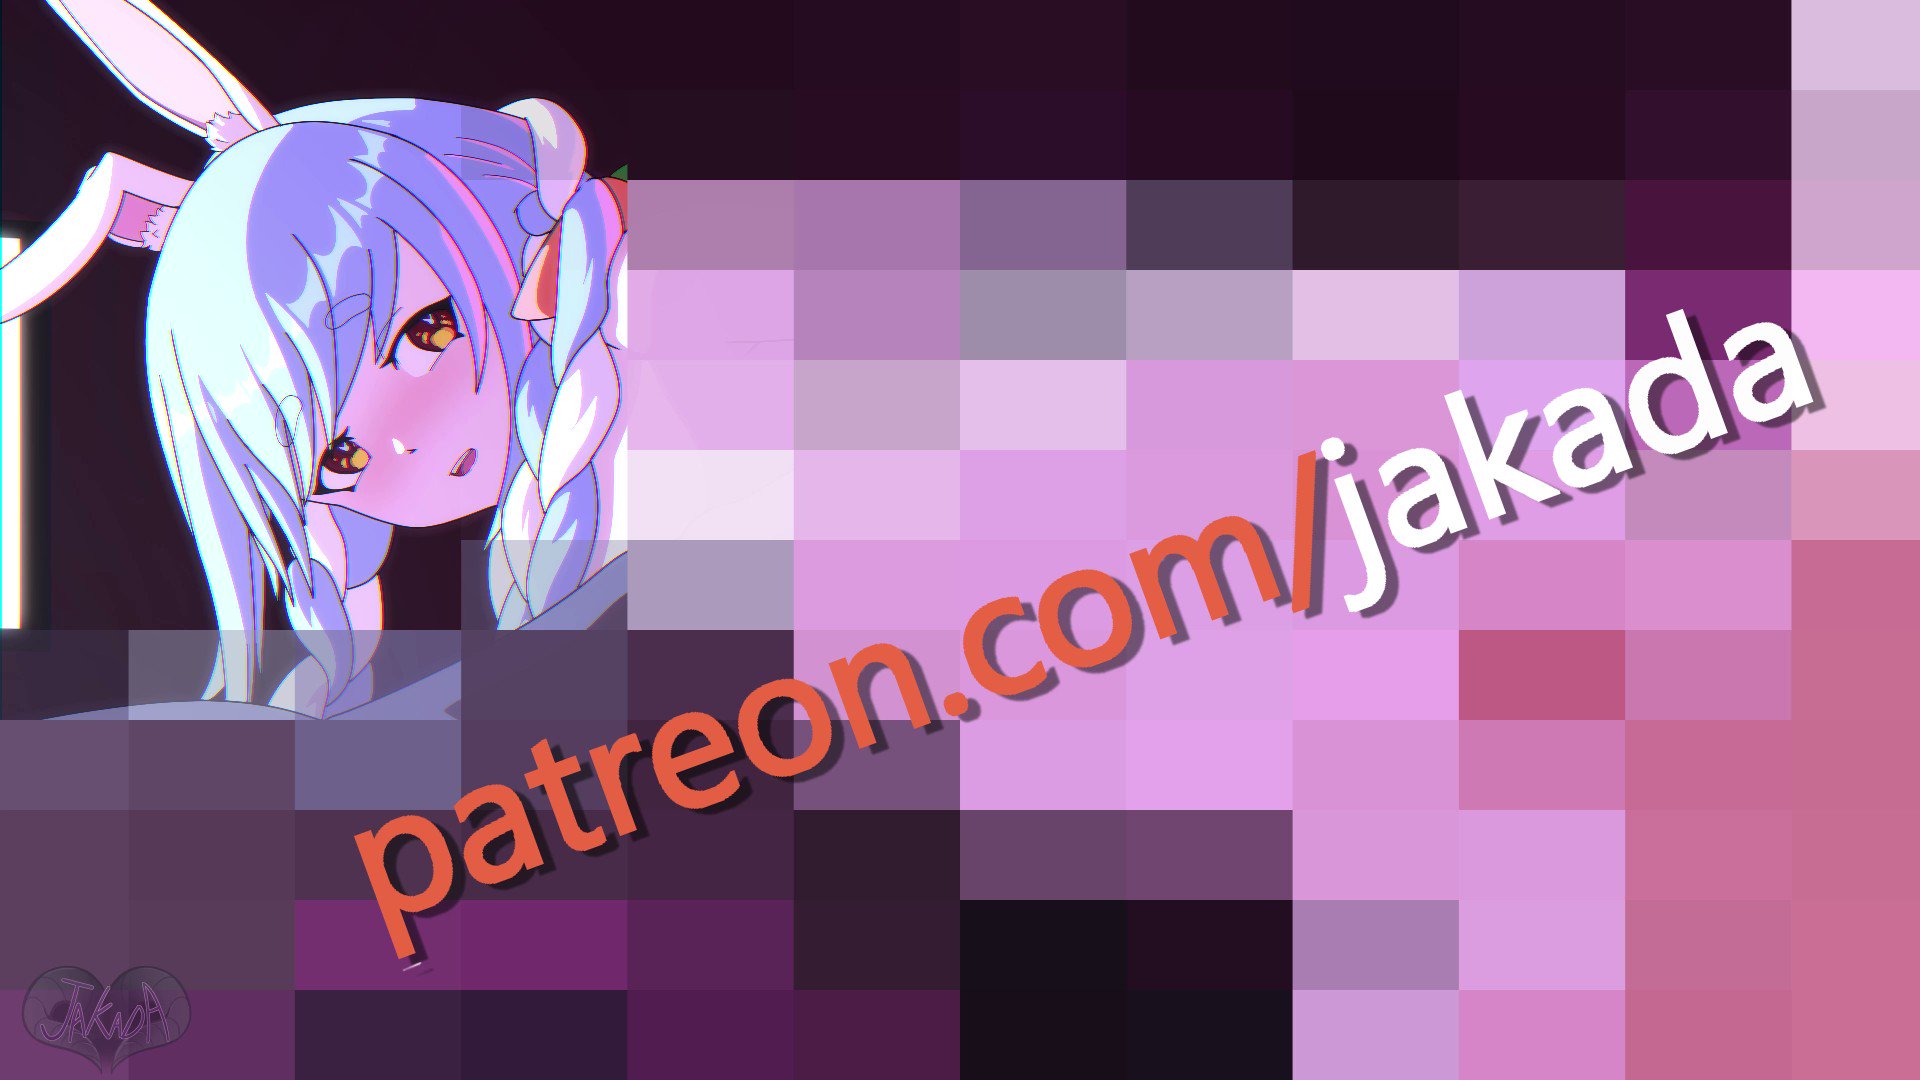 Jakada | COMMS Closed on X: Konpeko! This month's Patreon animation is up!  Featuring VA by @Nami955 and sound design by @shaykiafterdark  t.coPzRNYVXWXx  X